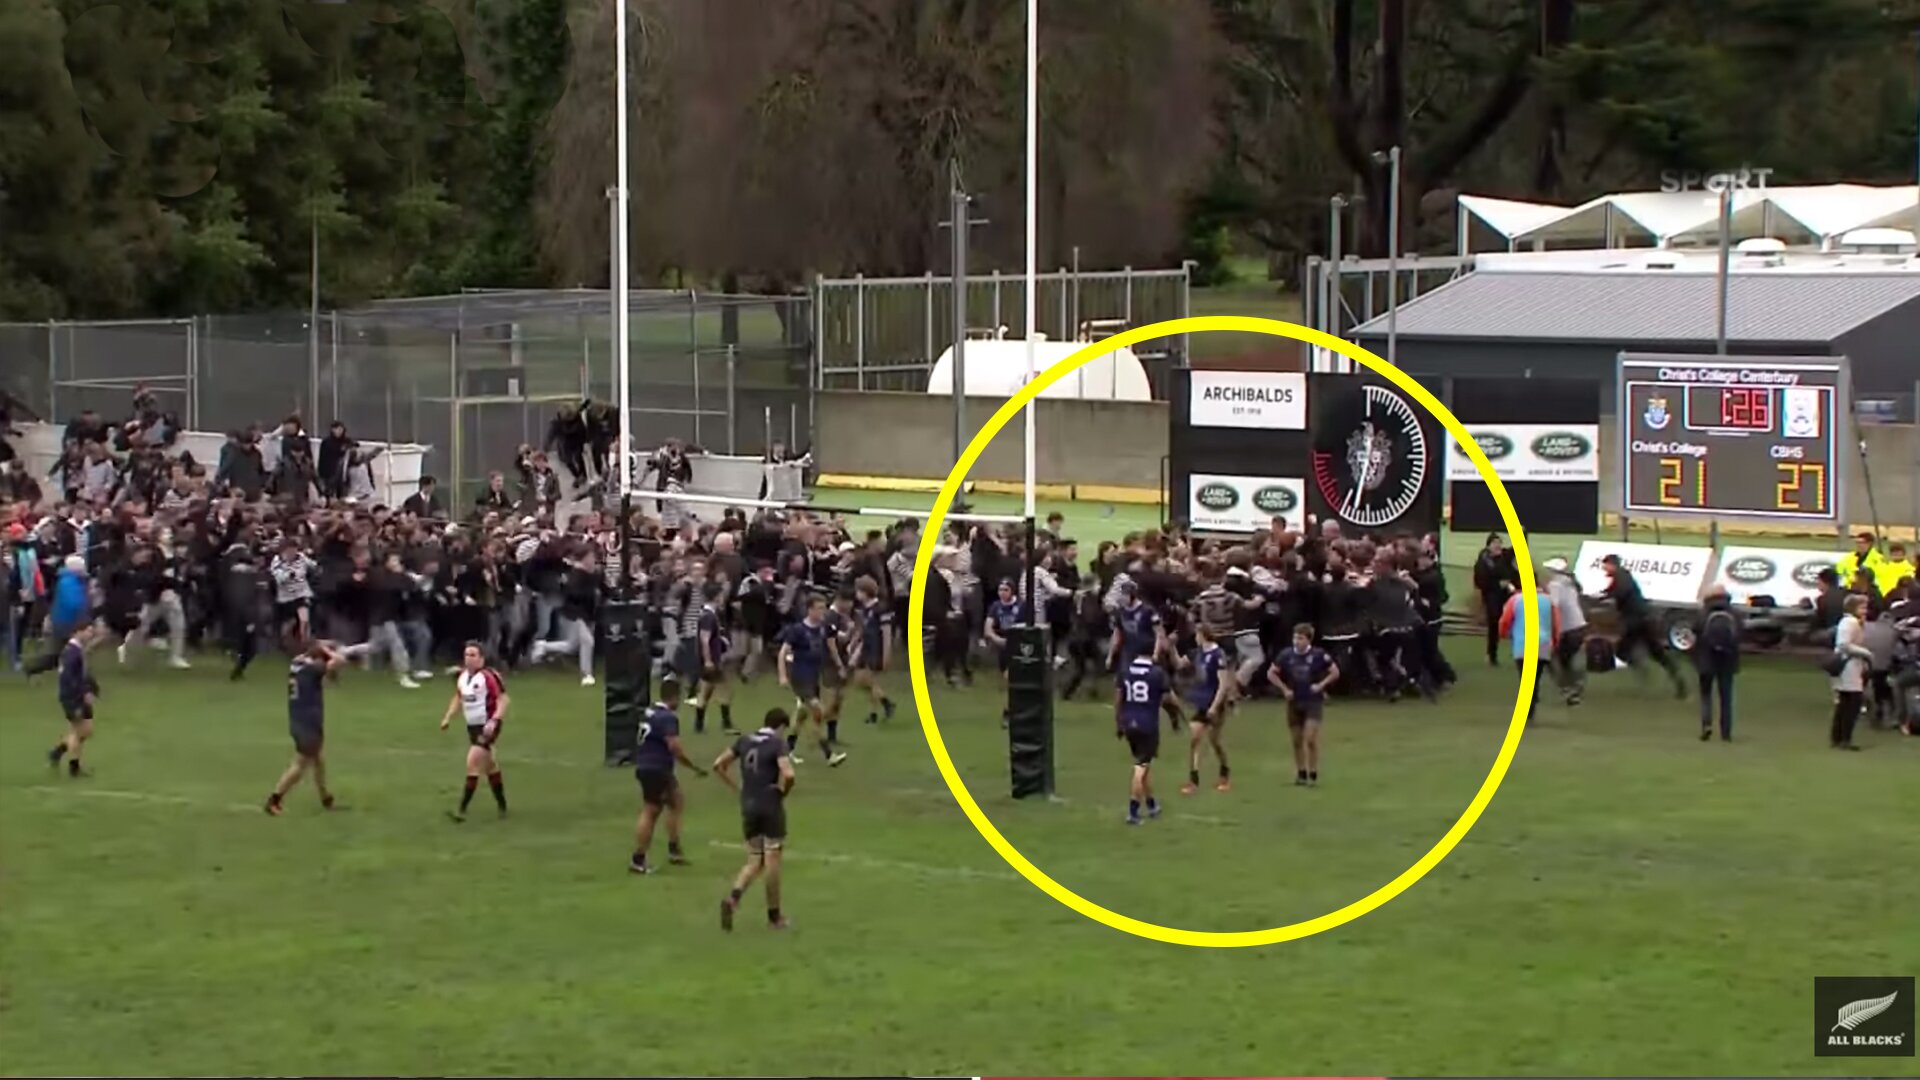 A prop in rugby causes absolute carnage with his very first involvement on the pitch